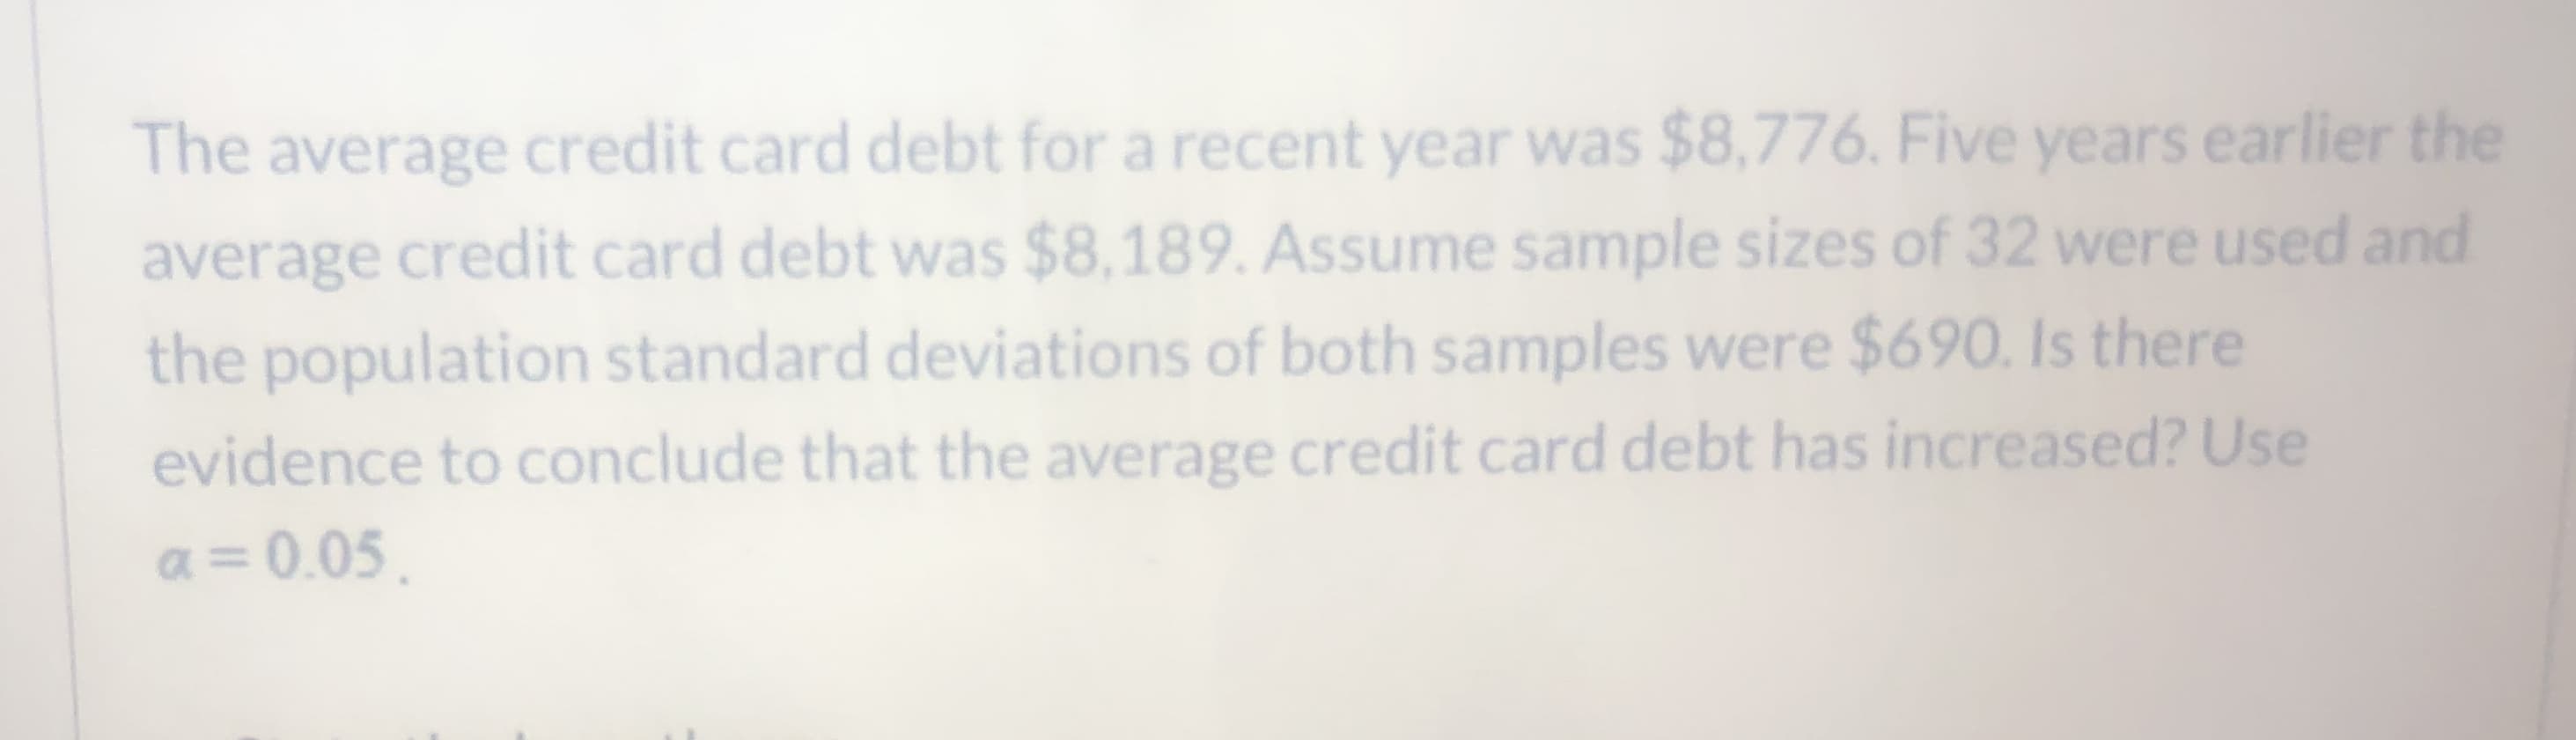 The average credit card debt for a recent year was $8,776. Five years earlier the
average credit card debt was $8,189. Assume sample sizes of 32 were used and
the population standard deviations of both samples were $690. Is there
evidence to conclude that the average credit card debt has increased? Use
a = 0.05.
